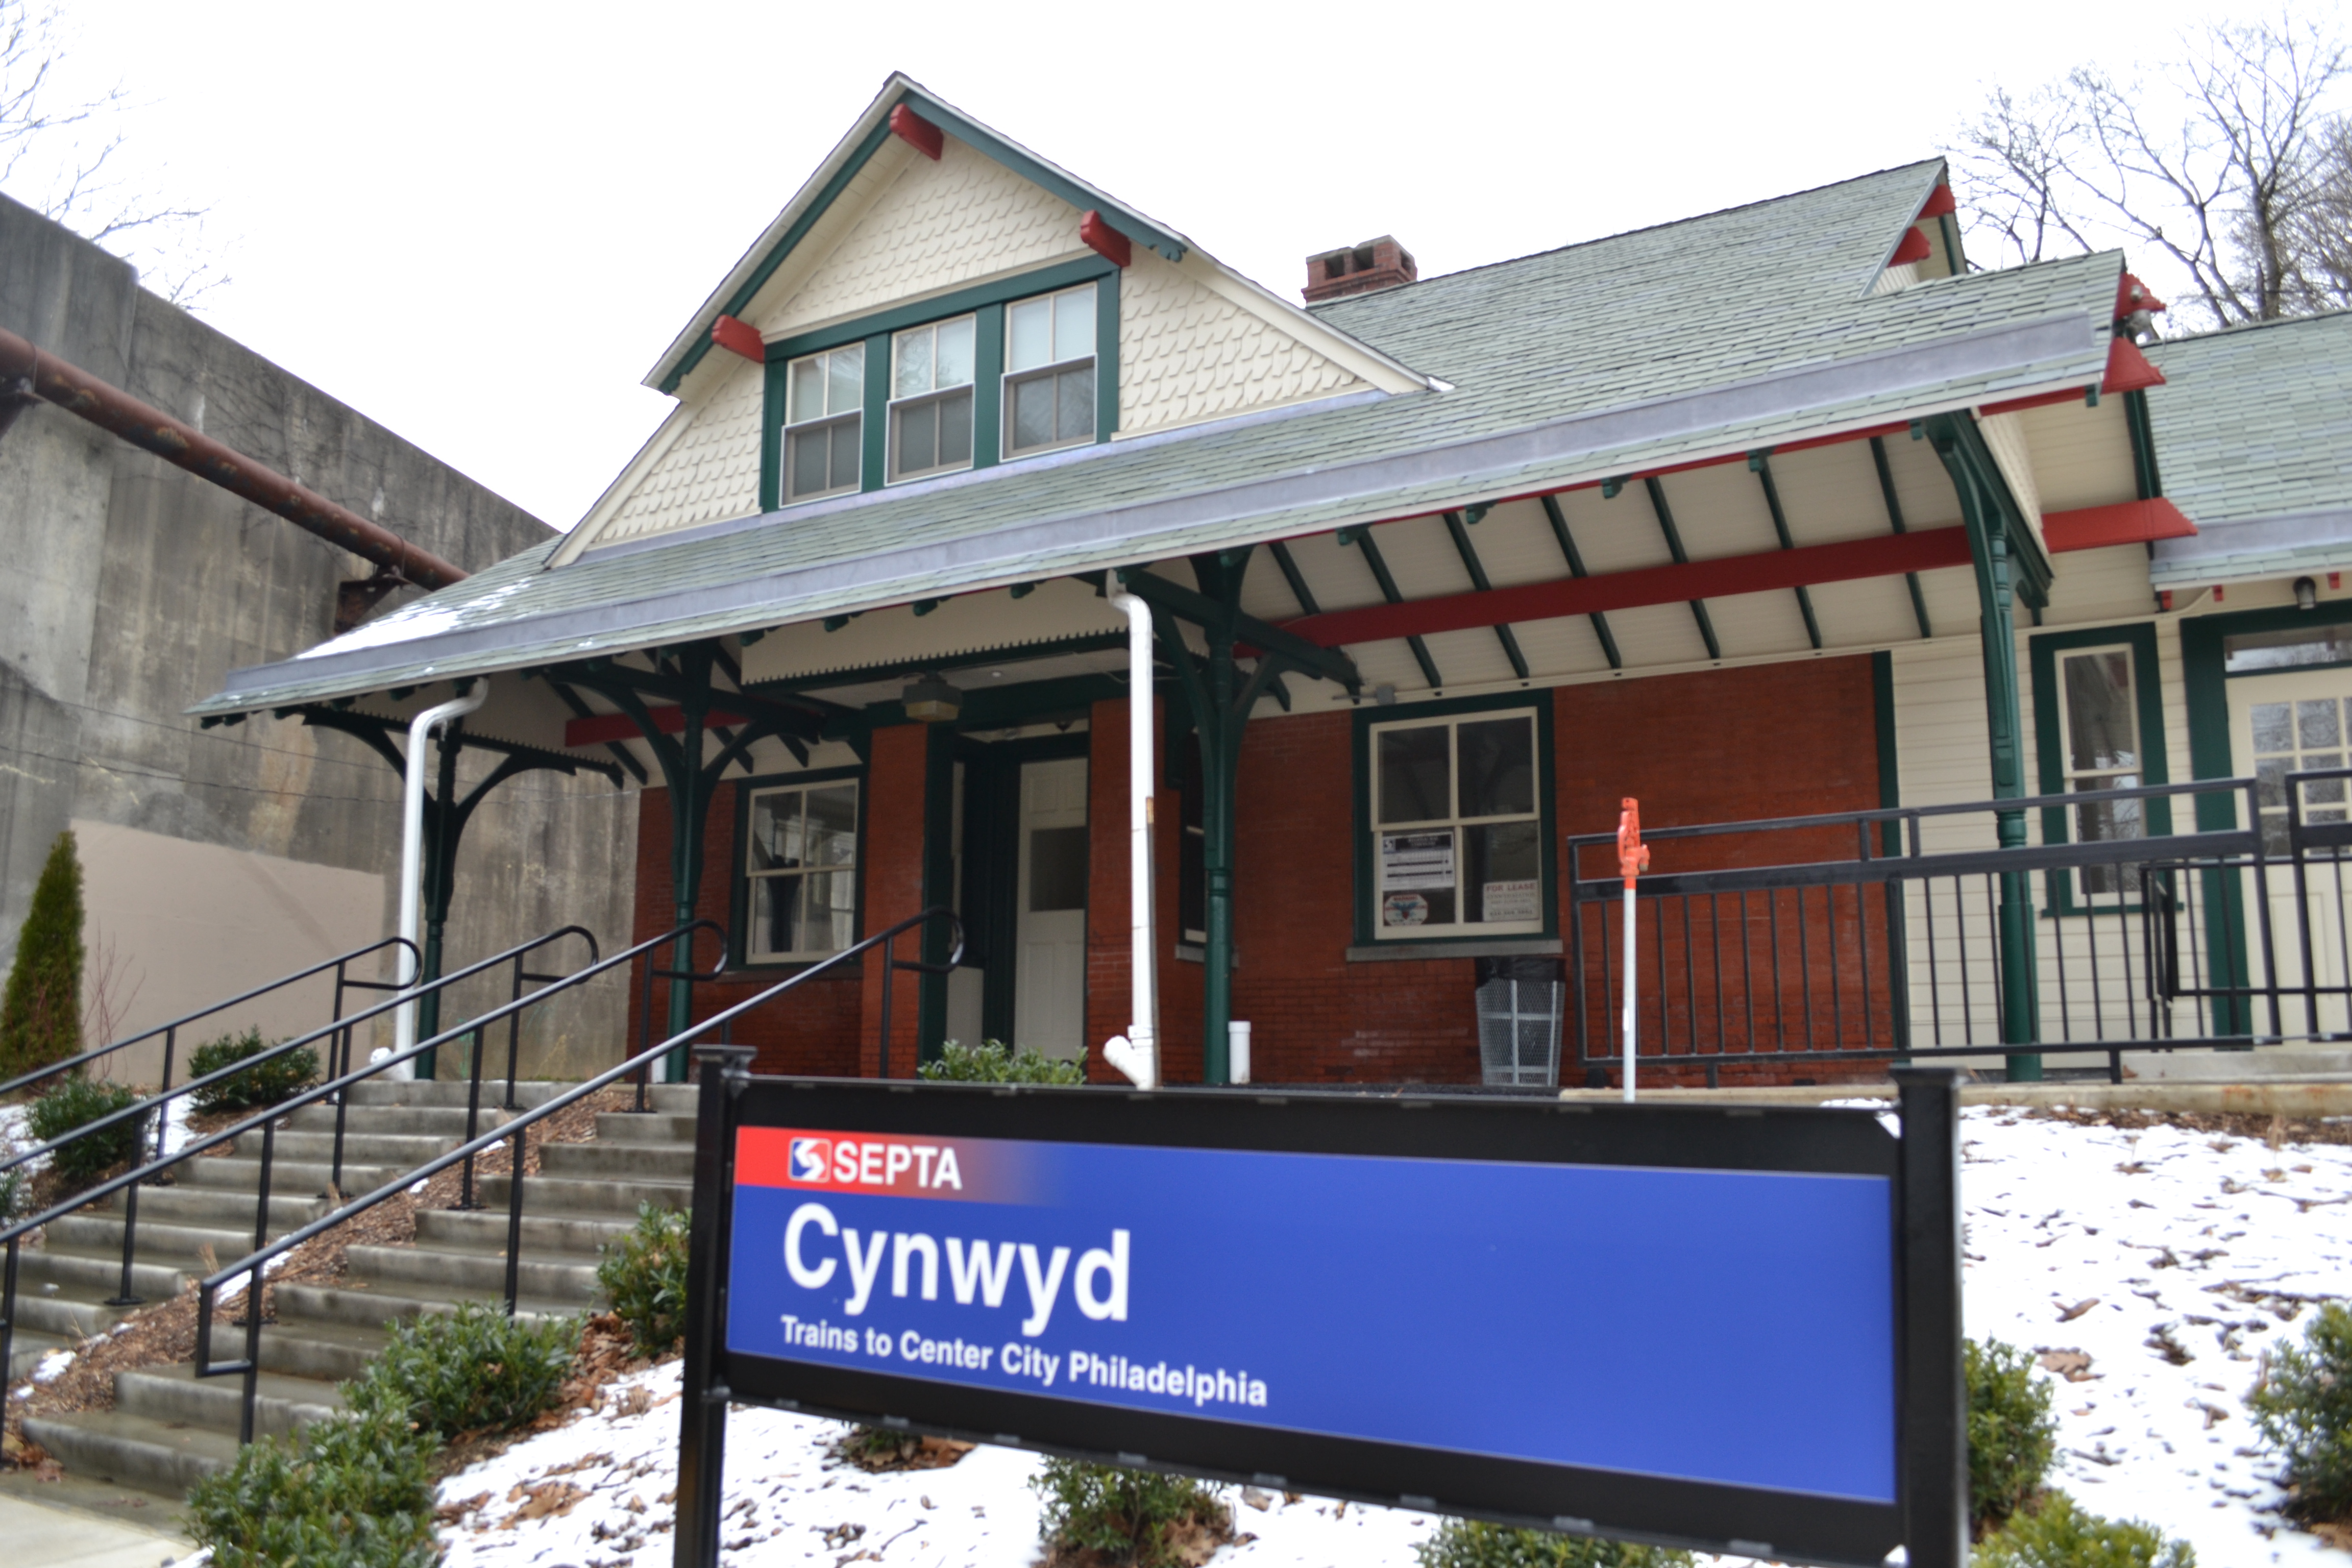 Renovations on the Cynwyd Station are almost complete, will include stormwater benches